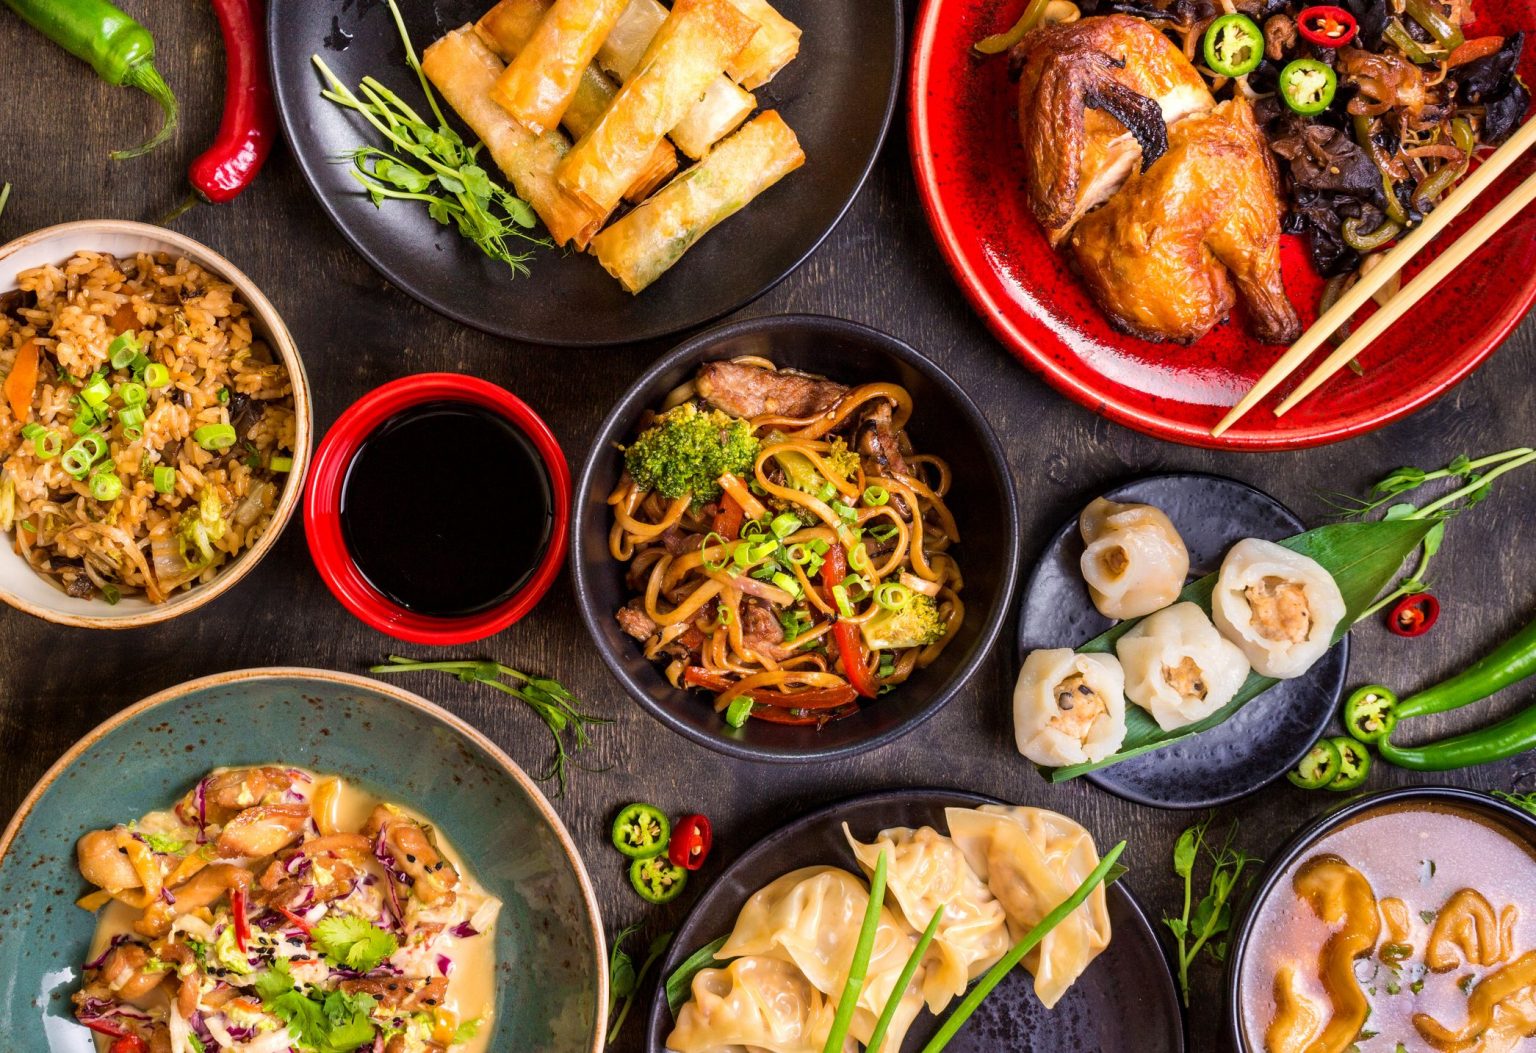 A Feast of Chinese and Foreign Food Cultures